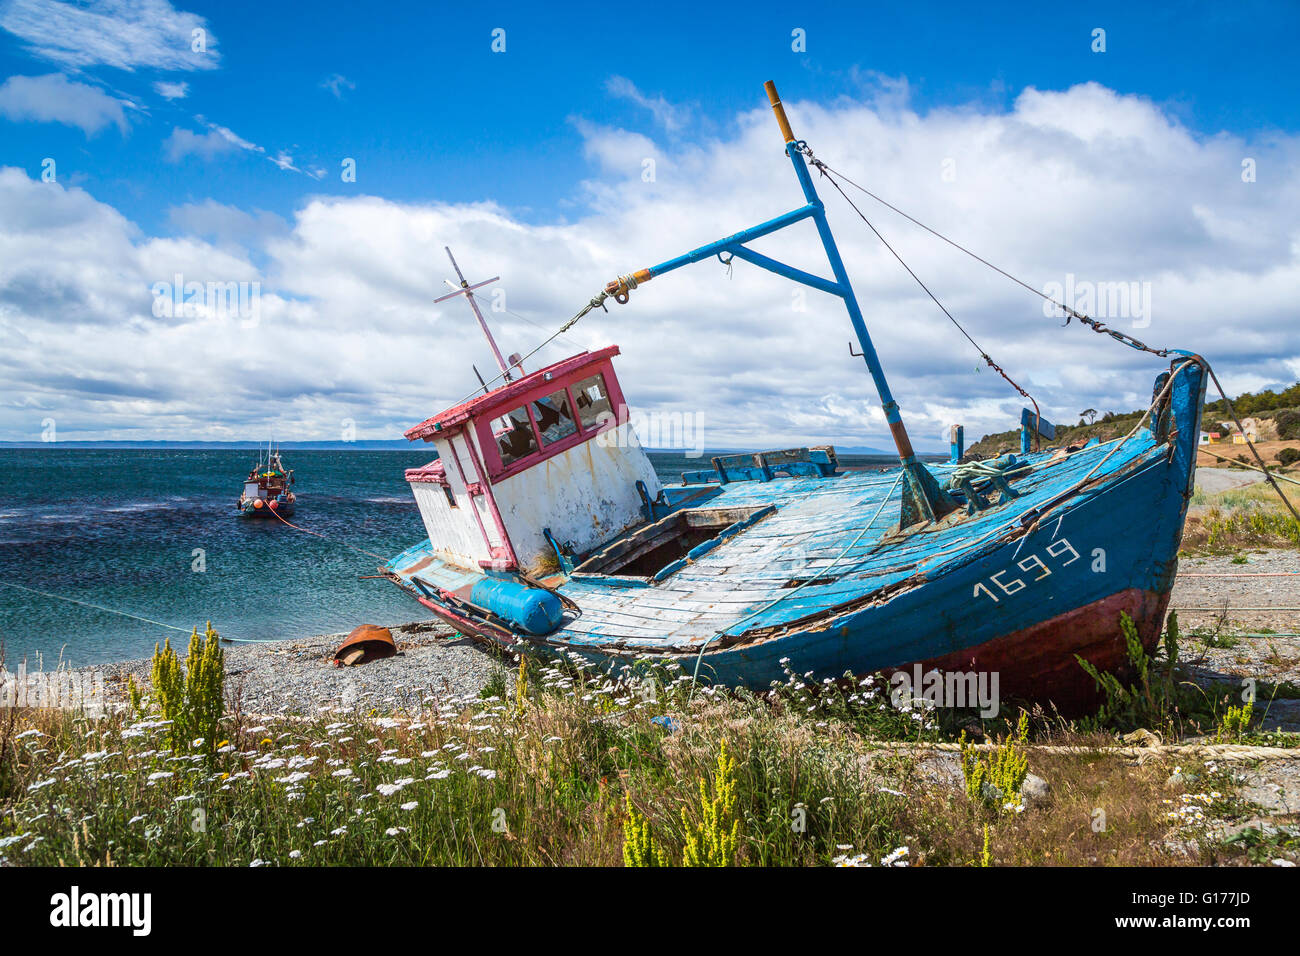 An old fishing boat on the shores of the Strait of Magellan at Punta Carrera near Punta Arenas, Chile, South America. Stock Photo